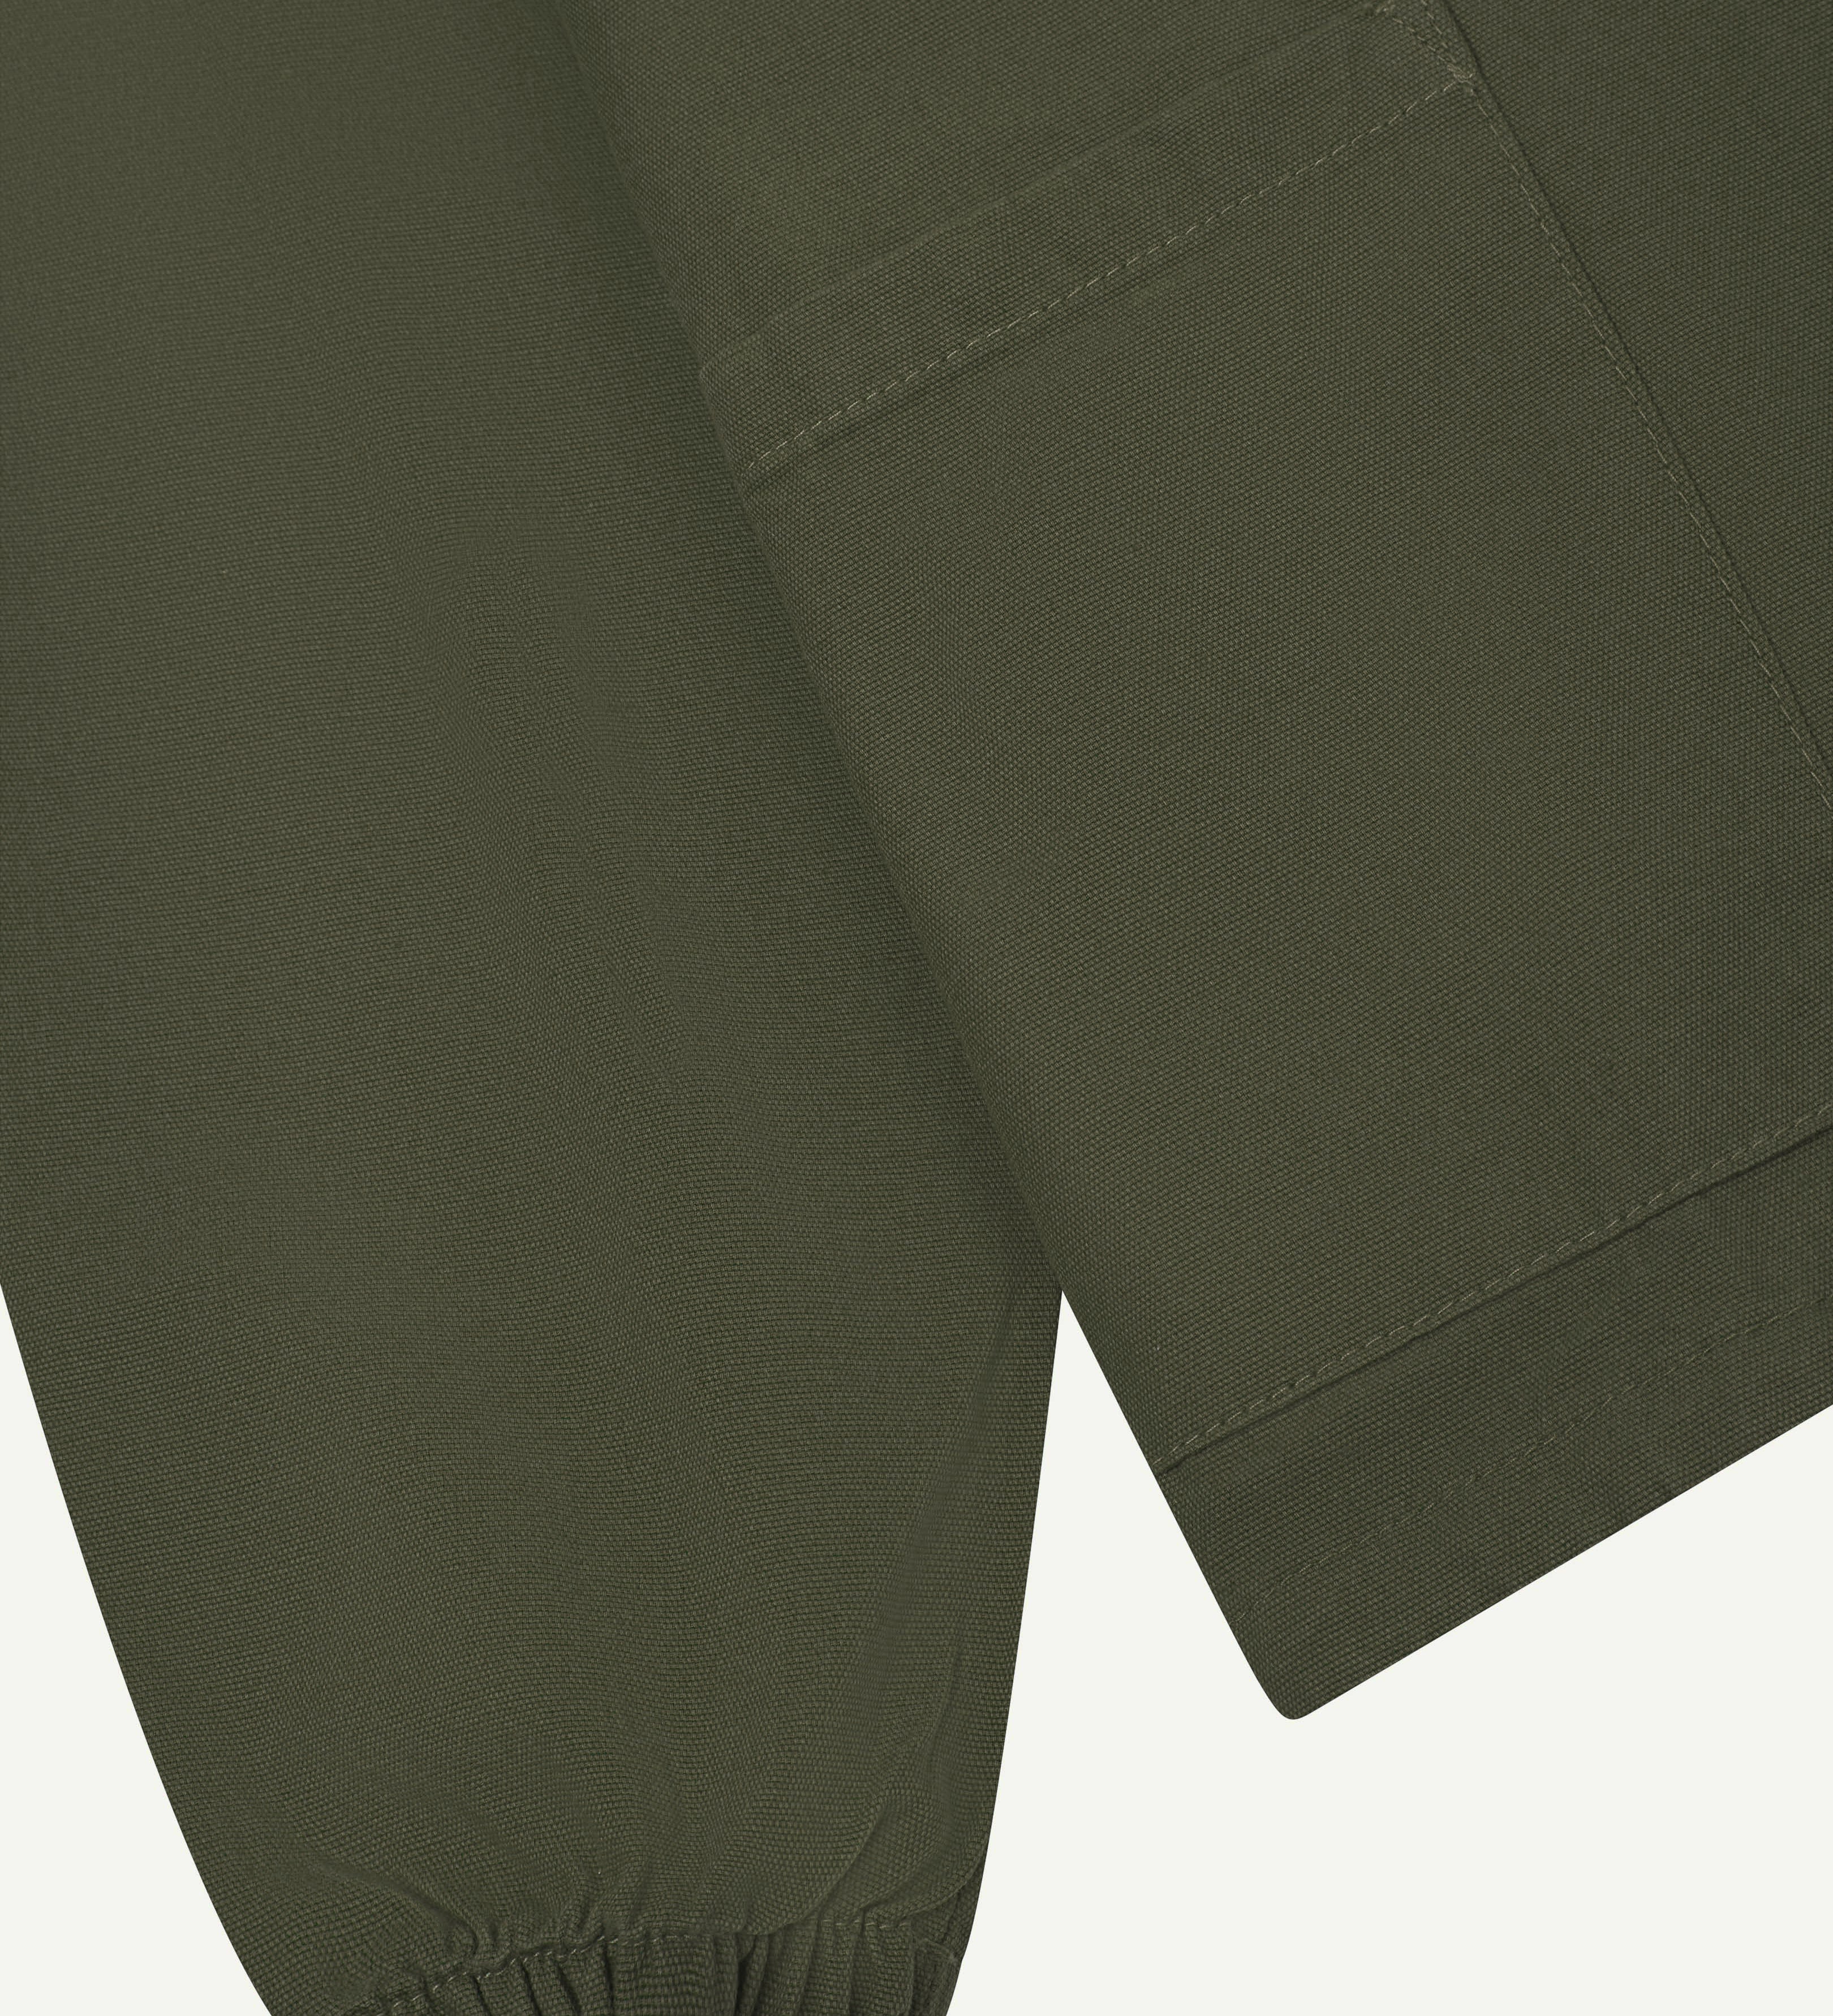 Close detail shot of uskees dark green men's organic cotton smock showing elasticated cuff & front pocket